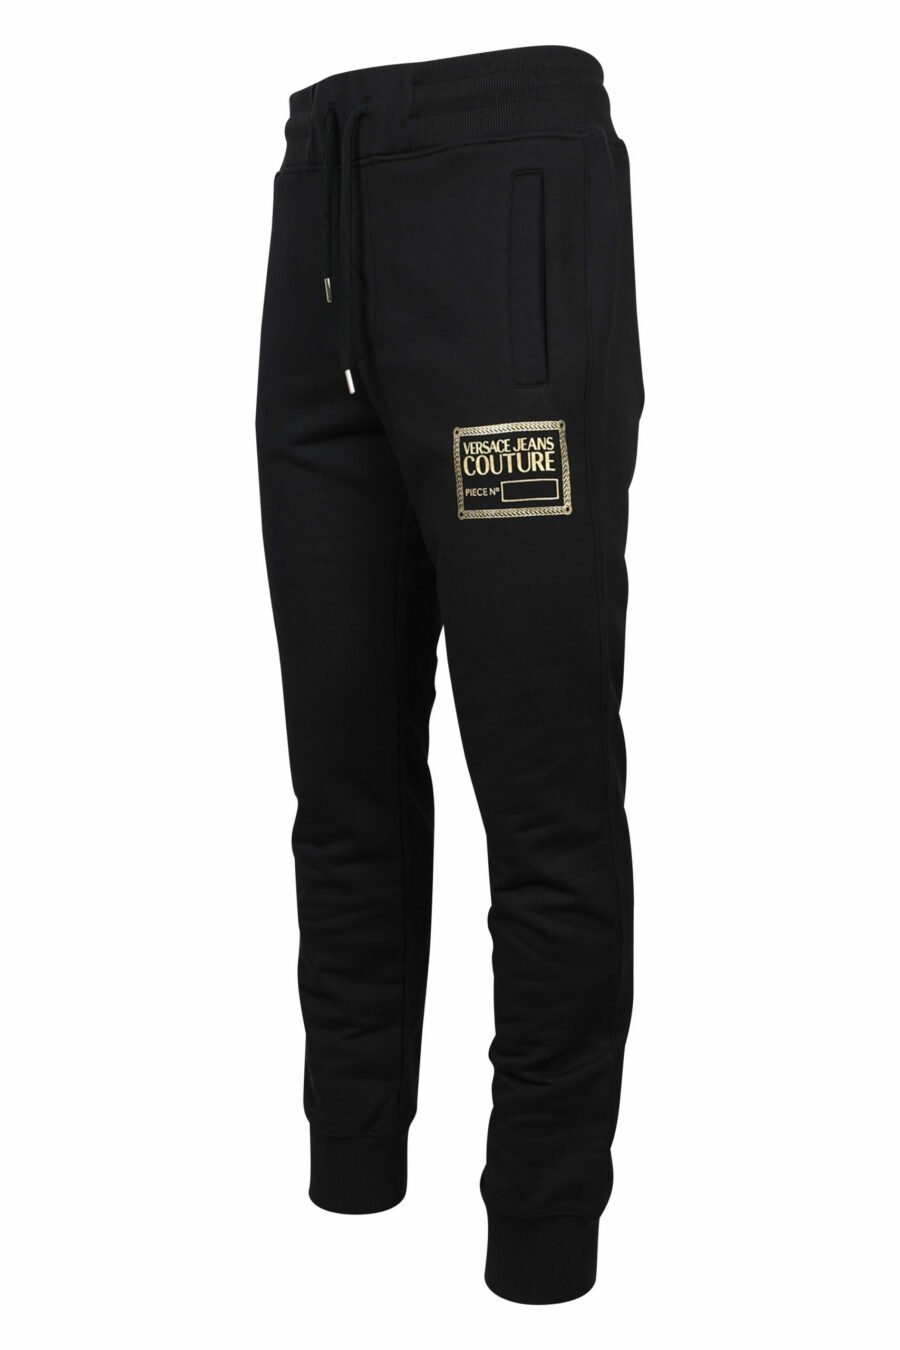 Tracksuit bottoms black with minilogue "piece number" - 8052019467178 1 scaled